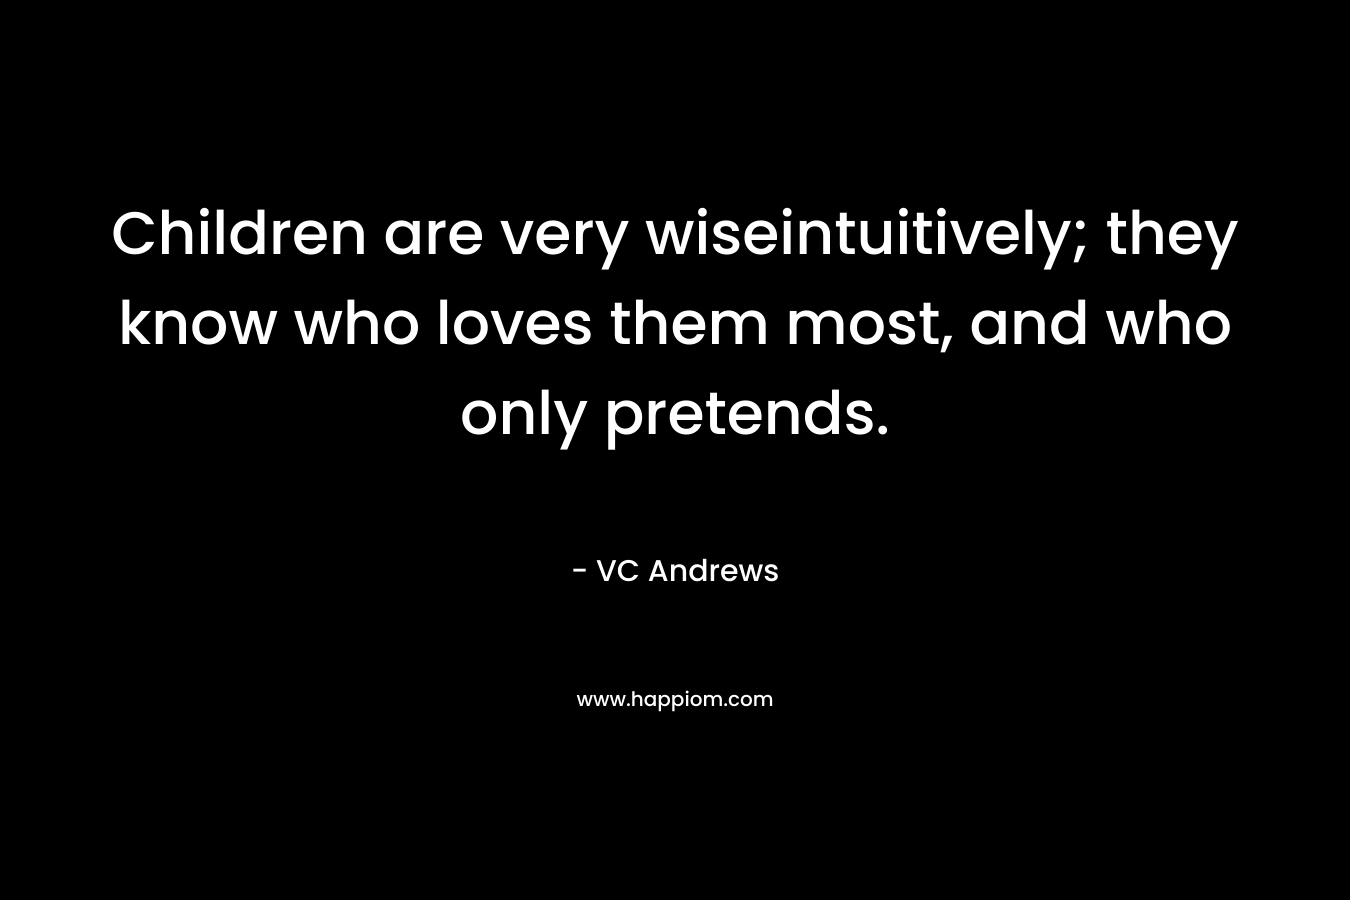 Children are very wiseintuitively; they know who loves them most, and who only pretends.